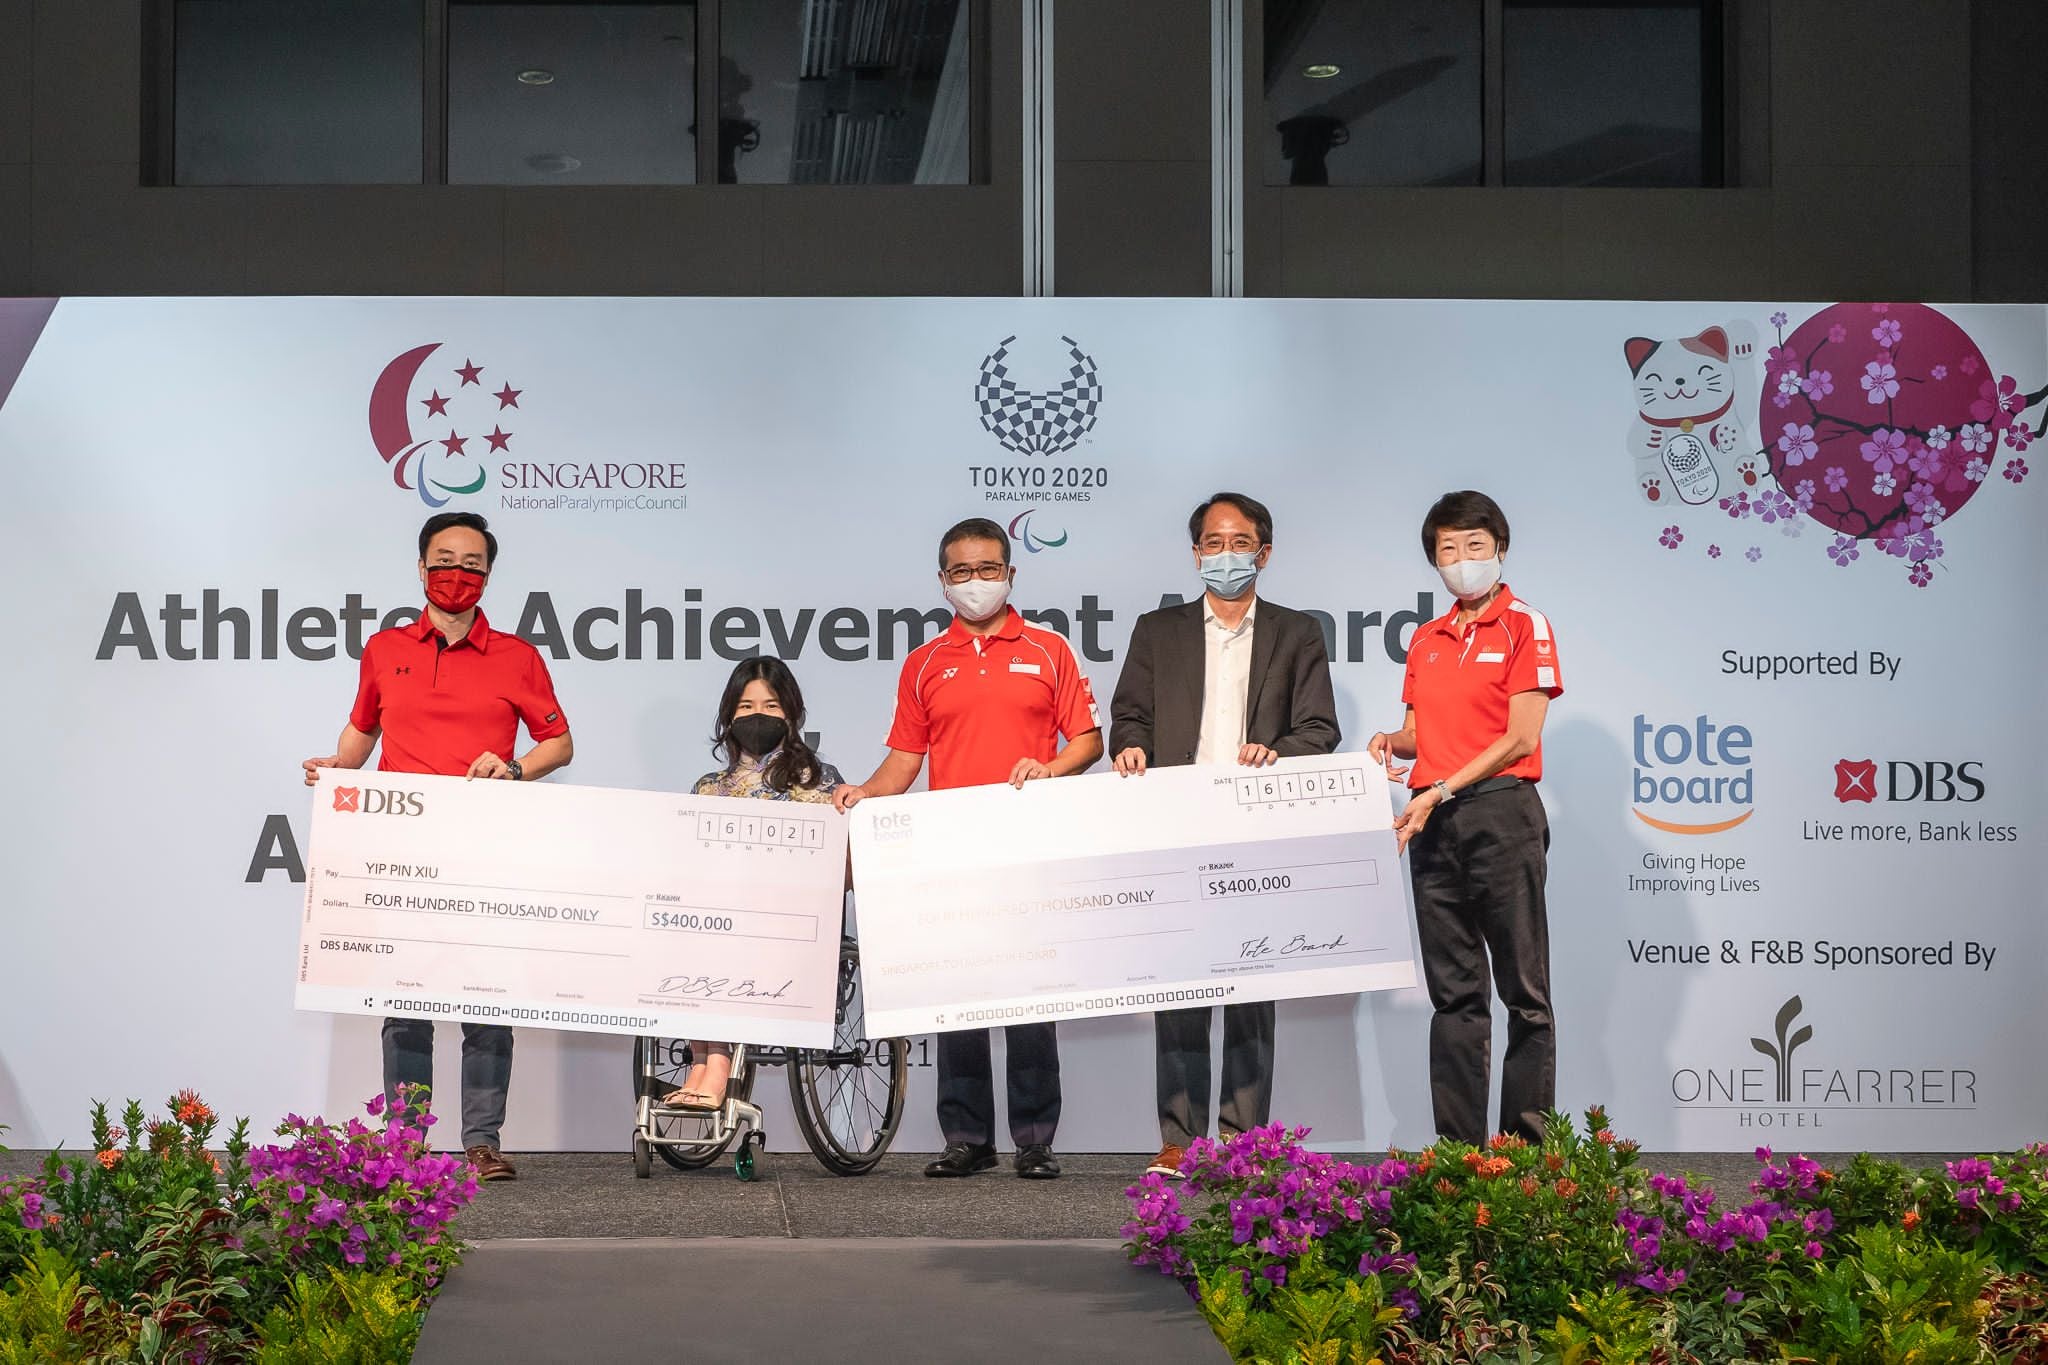 TeamSG's Yip Pin Xiu receives $800,000 for her Double-Gold medals at Tokyo 2020, following DBS Bank's new co-sponsorship!